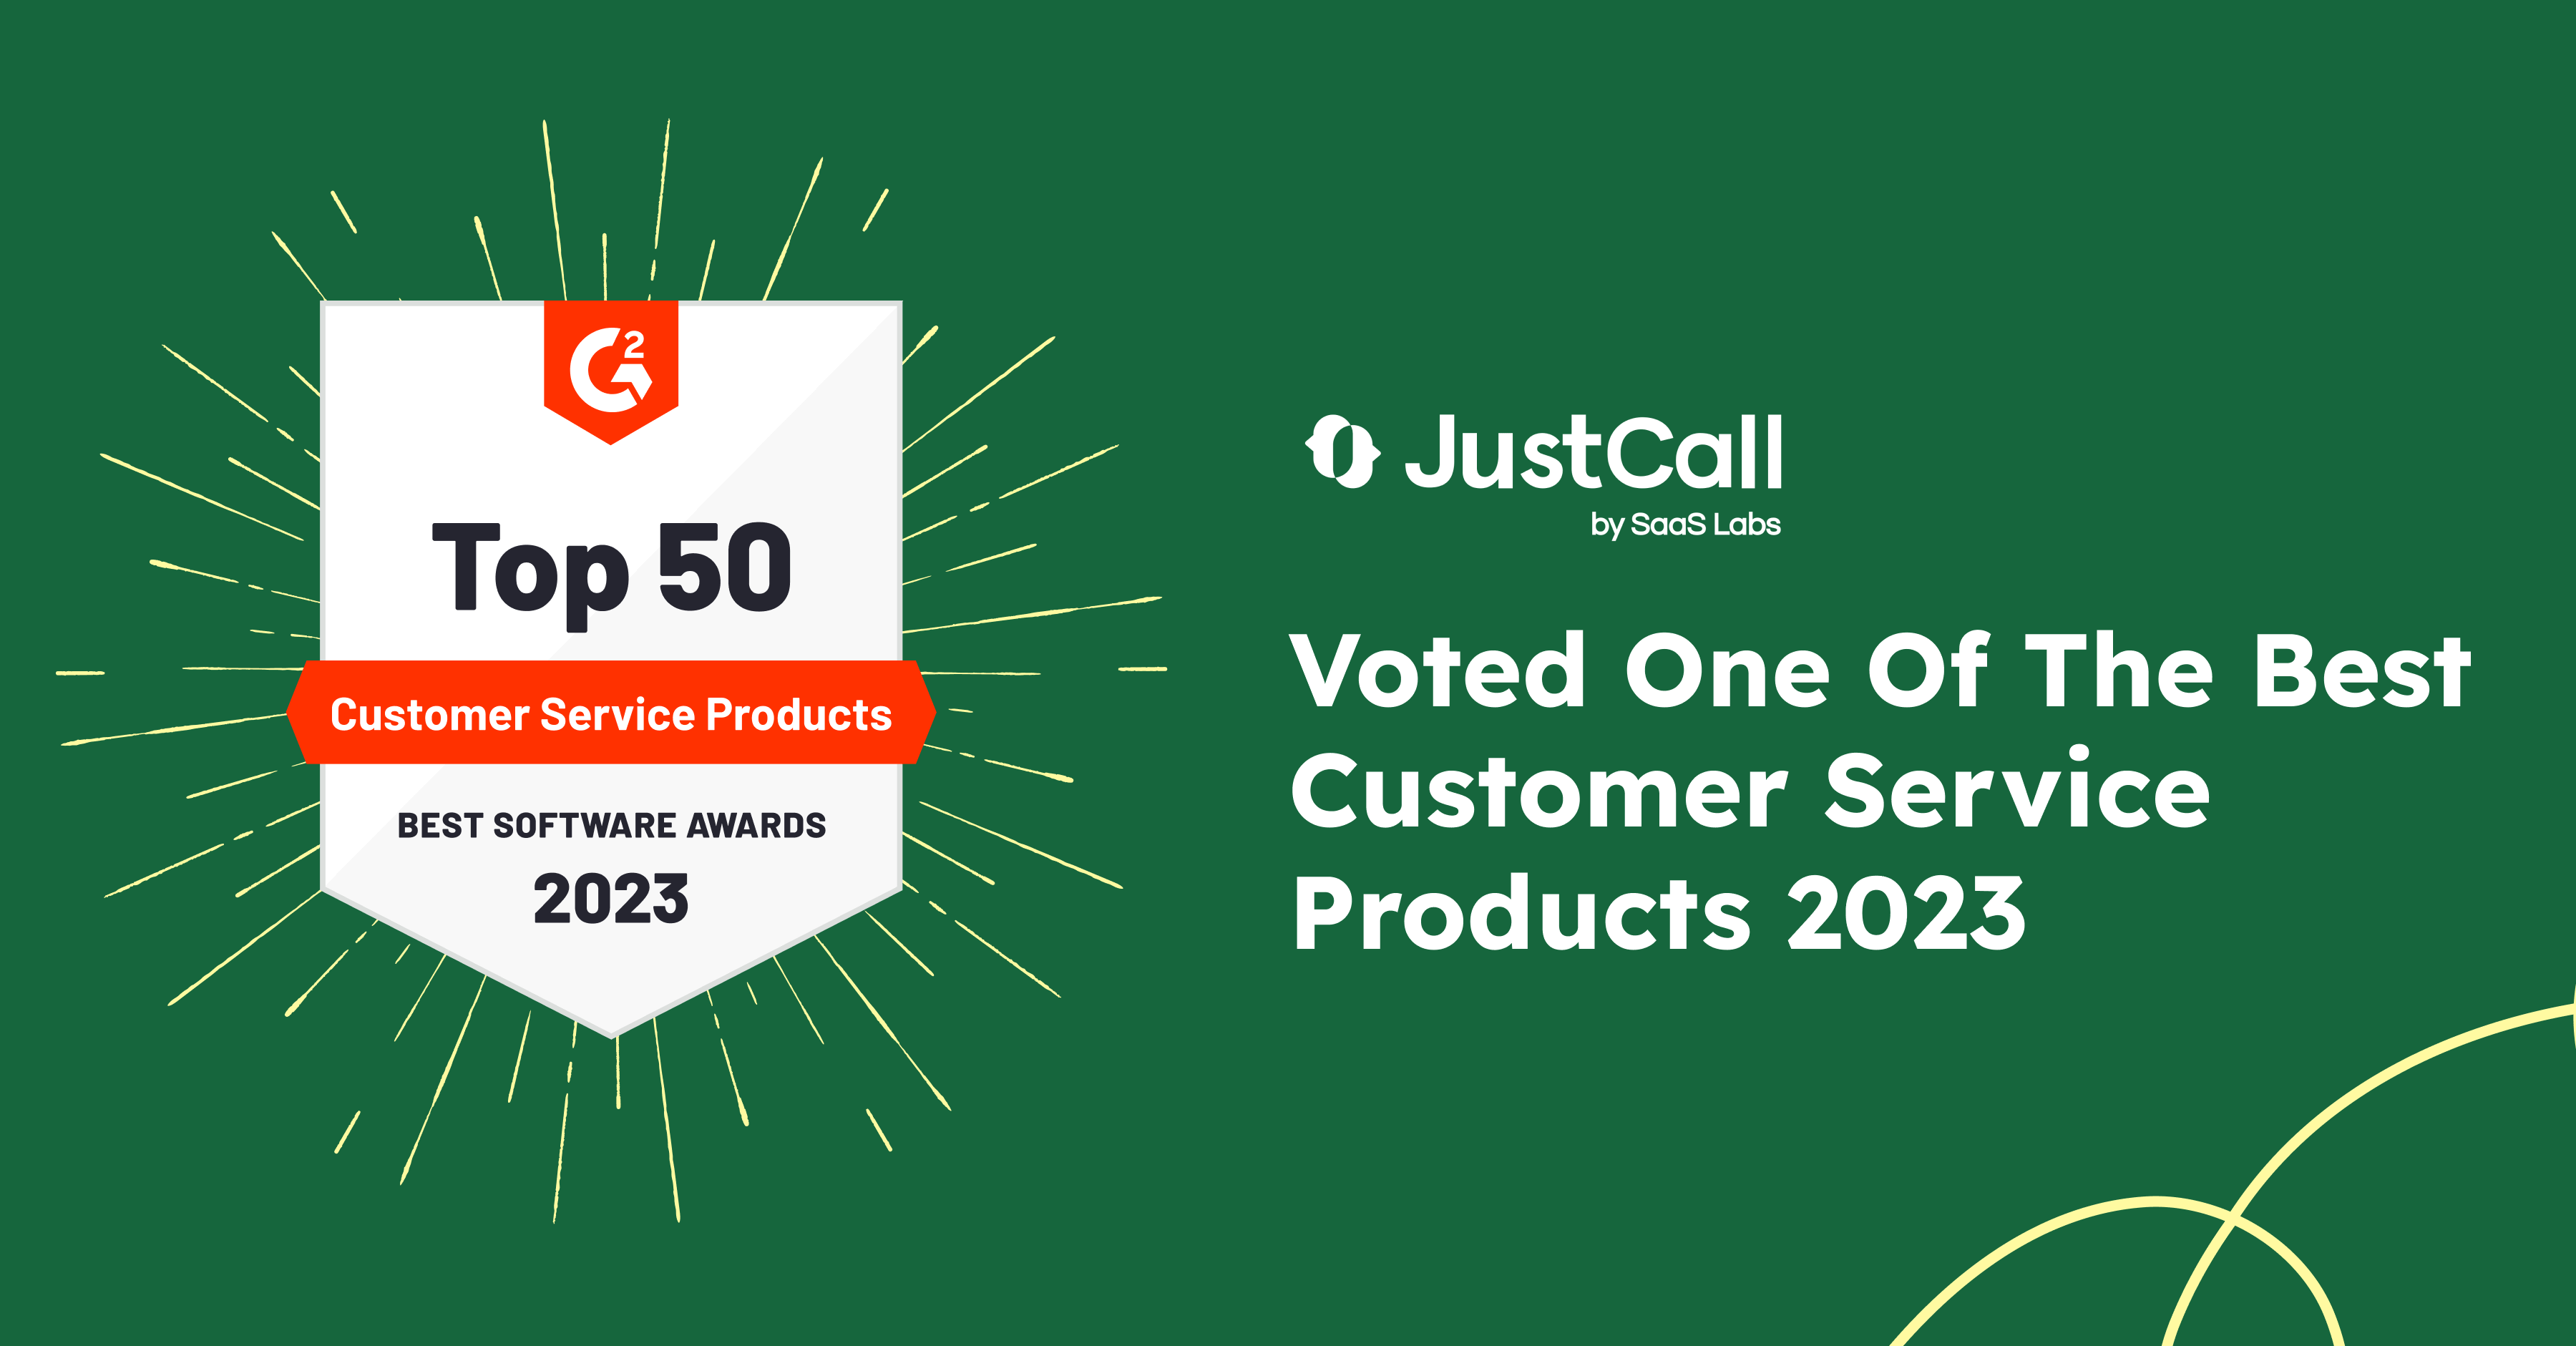 JustCall Named One of the Best Customer Service Products of 2023 by G2